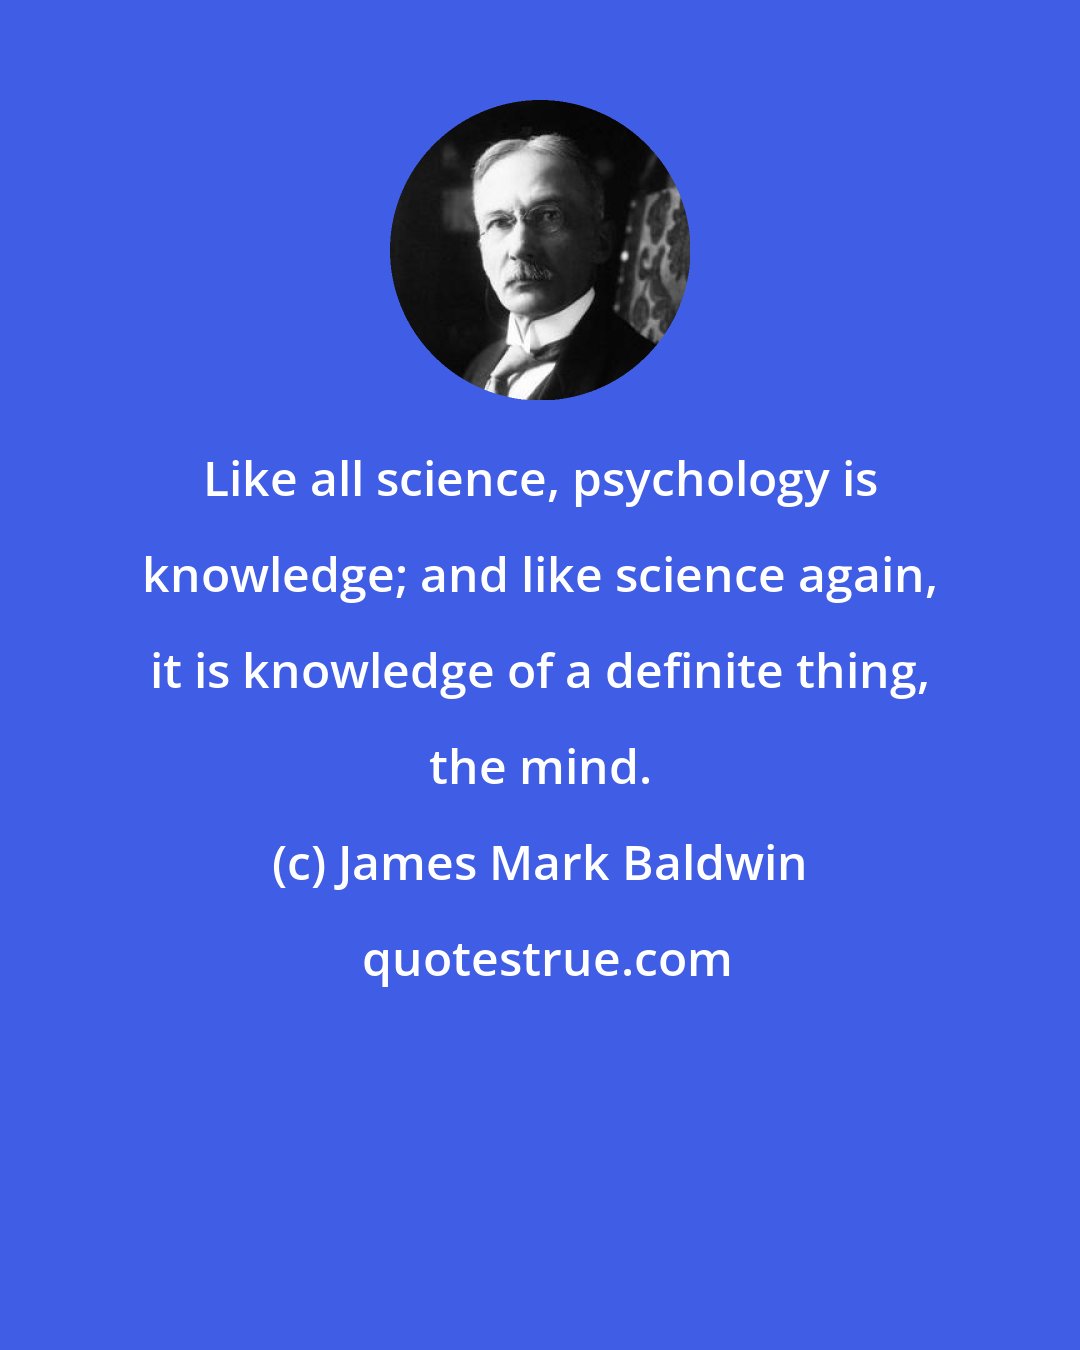 James Mark Baldwin: Like all science, psychology is knowledge; and like science again, it is knowledge of a definite thing, the mind.